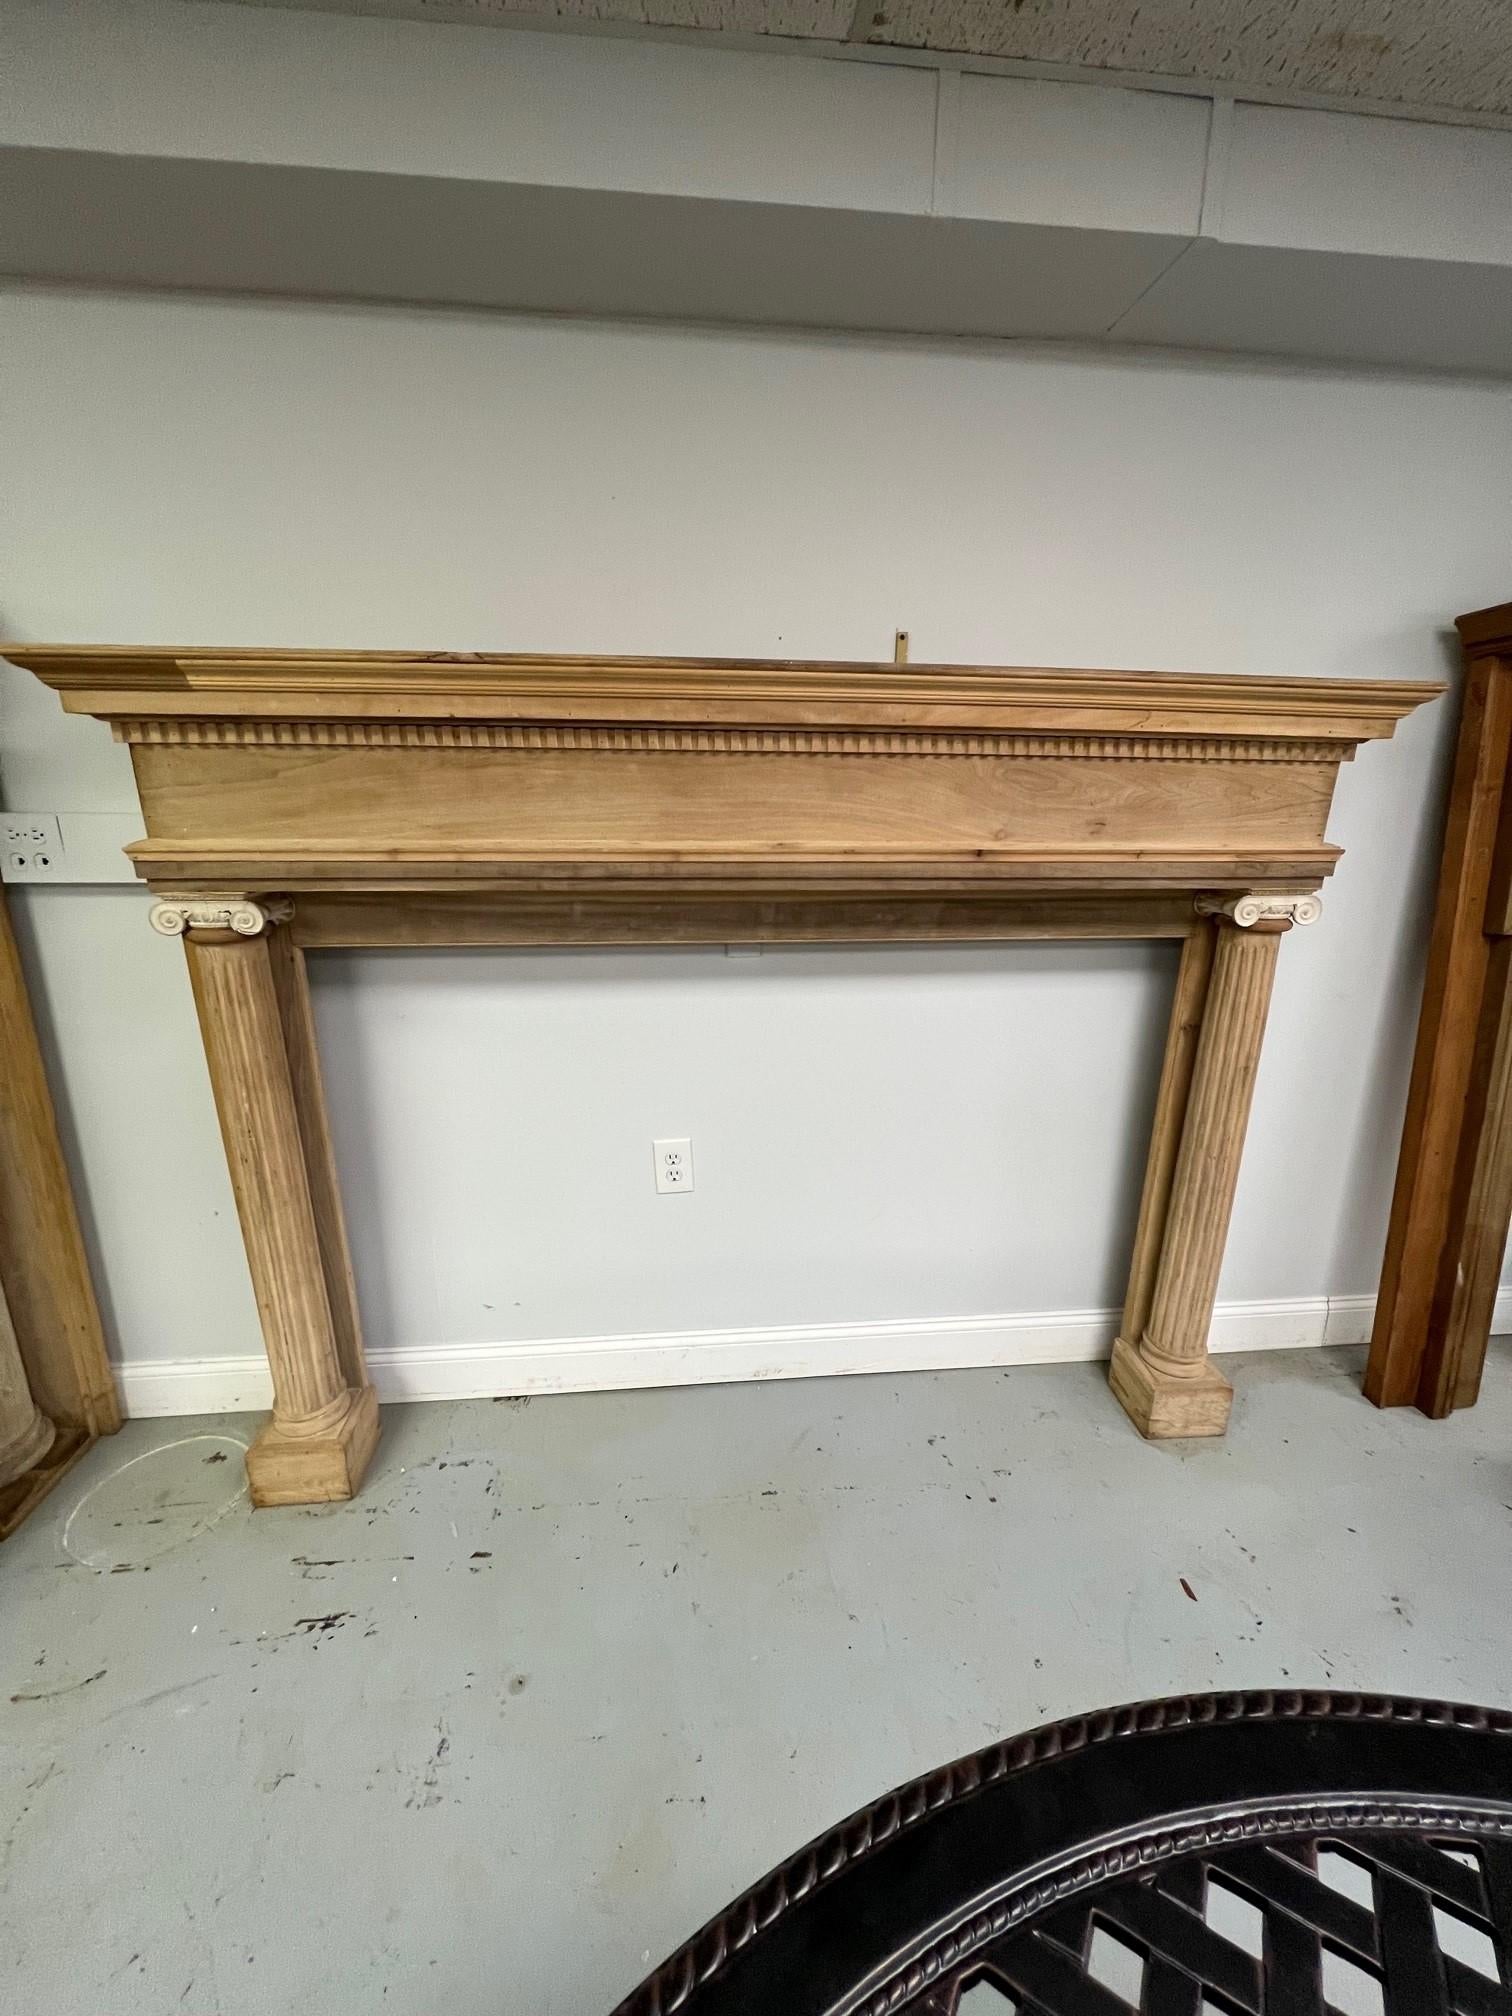 Early 20th century antique wood fireplace mantel with two plain columns with decorative capitals made of gesso, a very nice looking fireplace mantel. Its in good condition and would look great painted only needing a light sanding. This mantel was